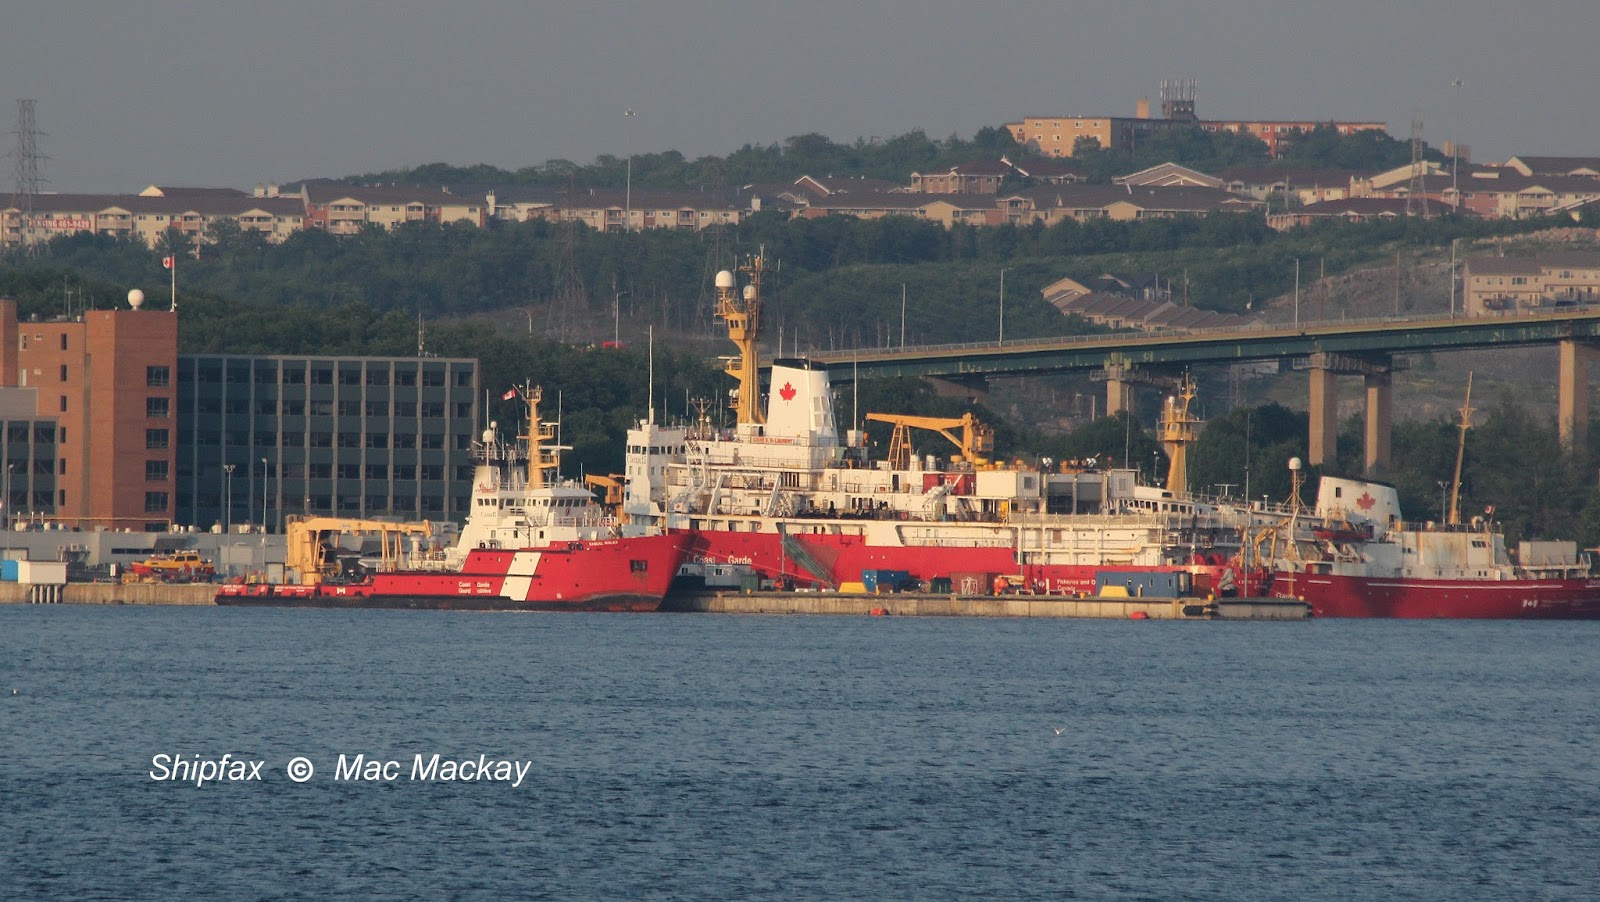 Shipfax: CCGS Samuel Risley from the Lakes